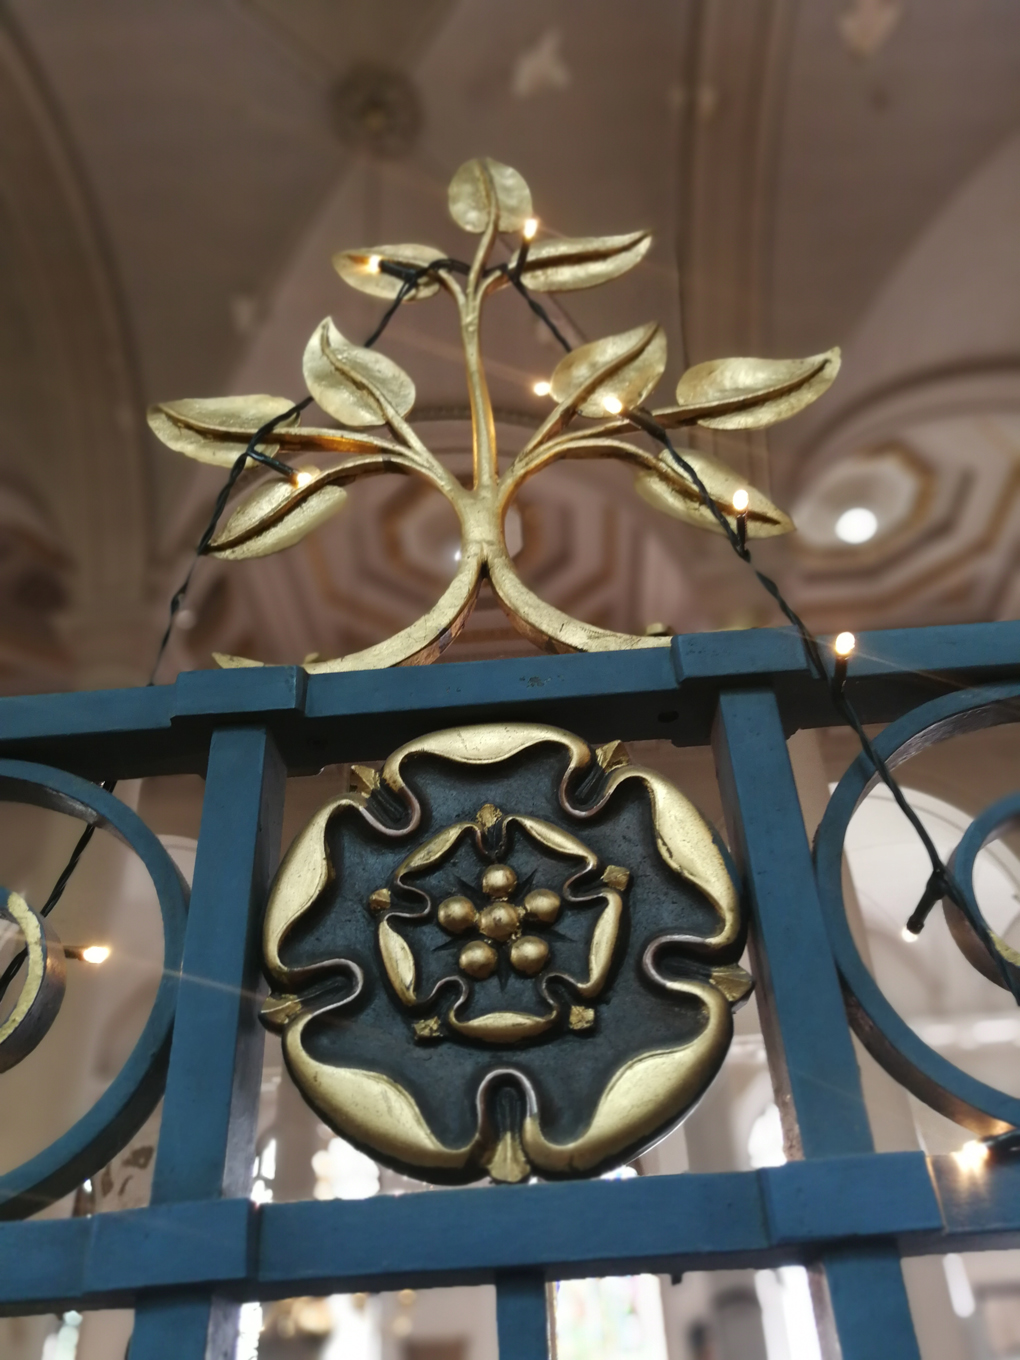 blue and gold painted ironwork in the shape of flowers and leaves